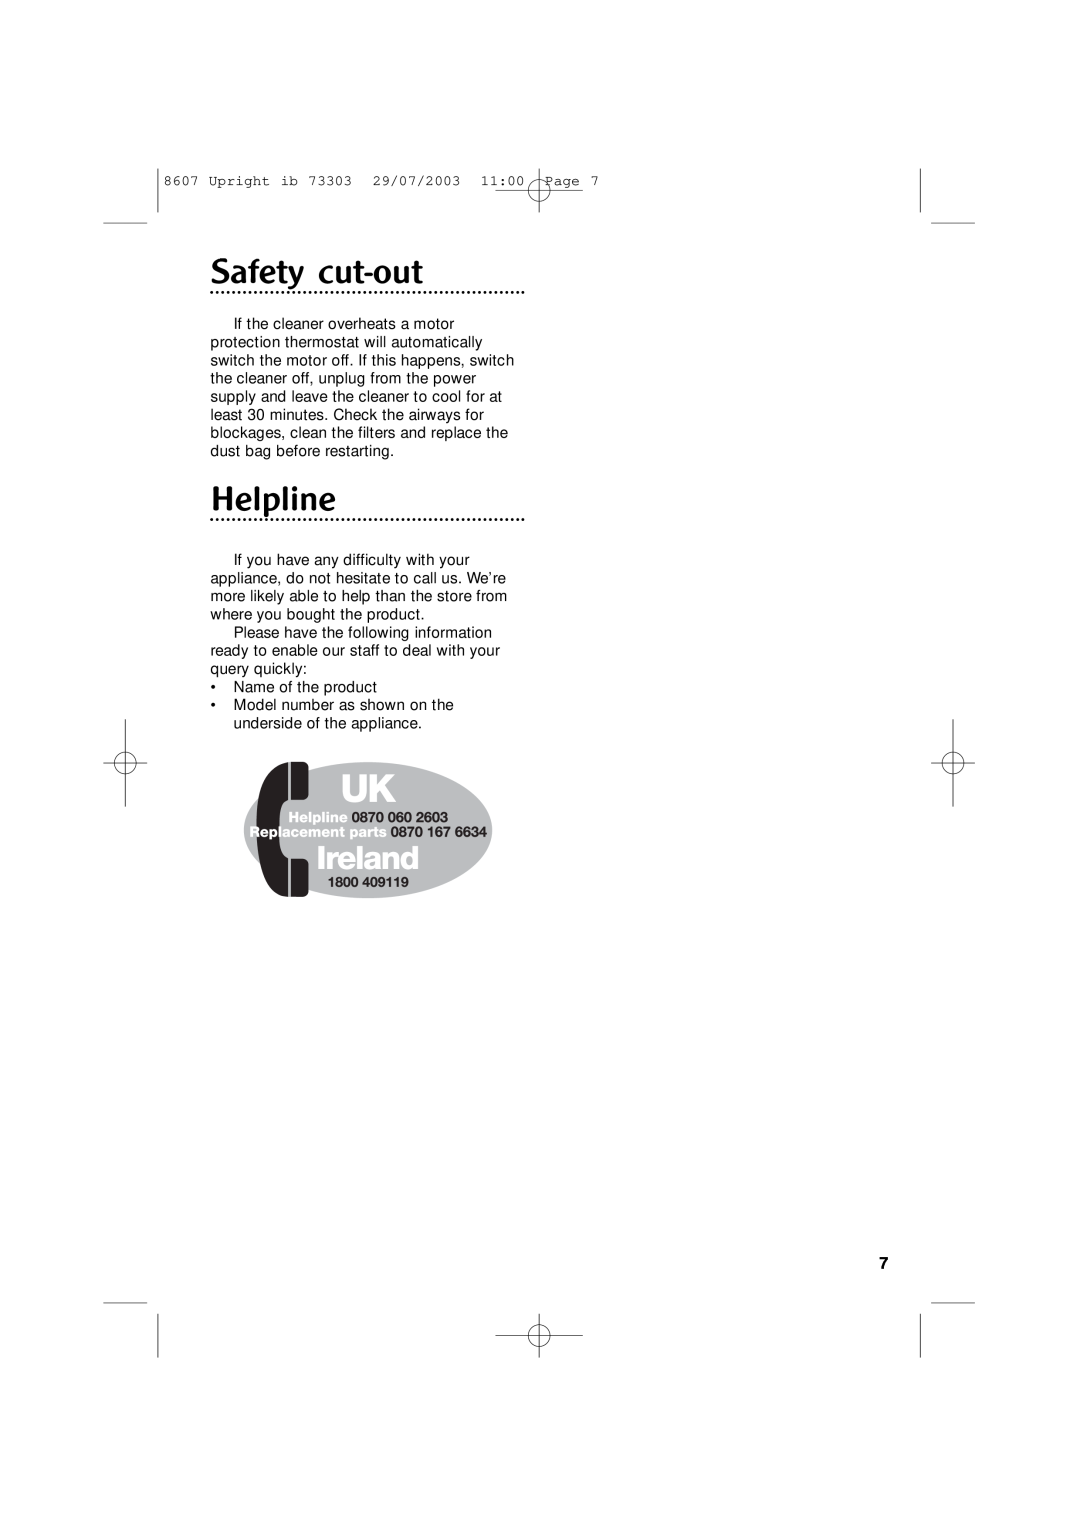 Morphy Richards Ultralight vacuum cleaner manual Safety cut-out, Helpline 